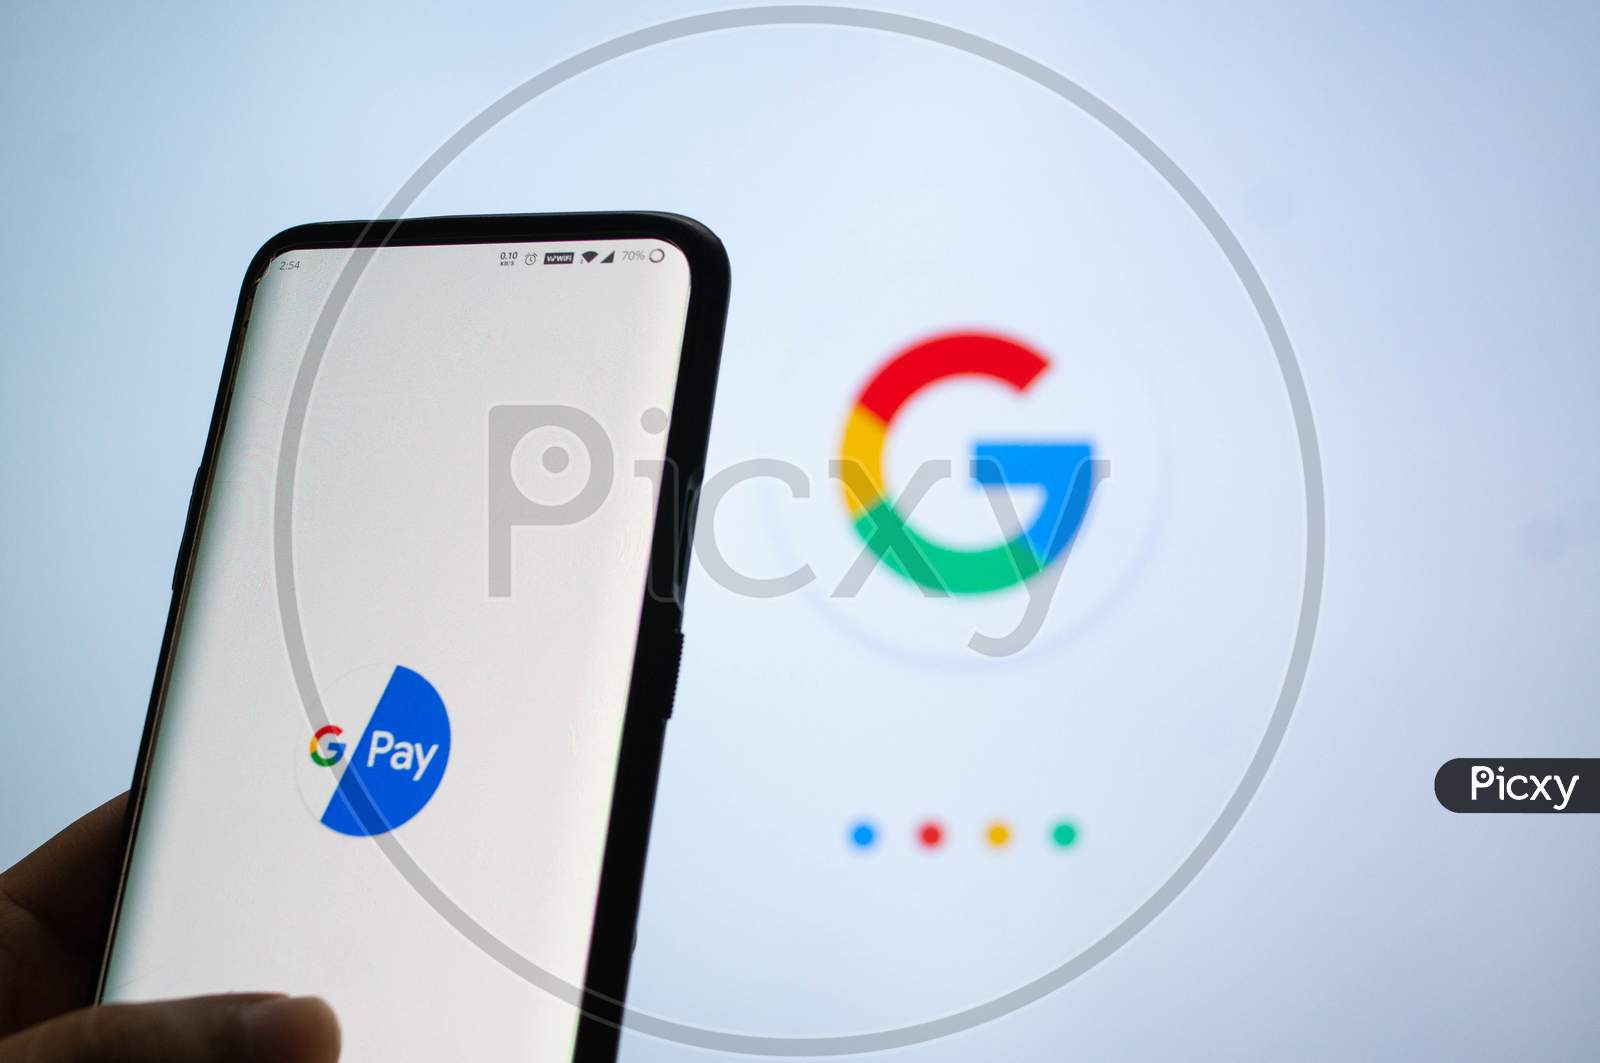 Google Pay App Logged In On A Mobile Infront Of A White Screen With Google Symbol